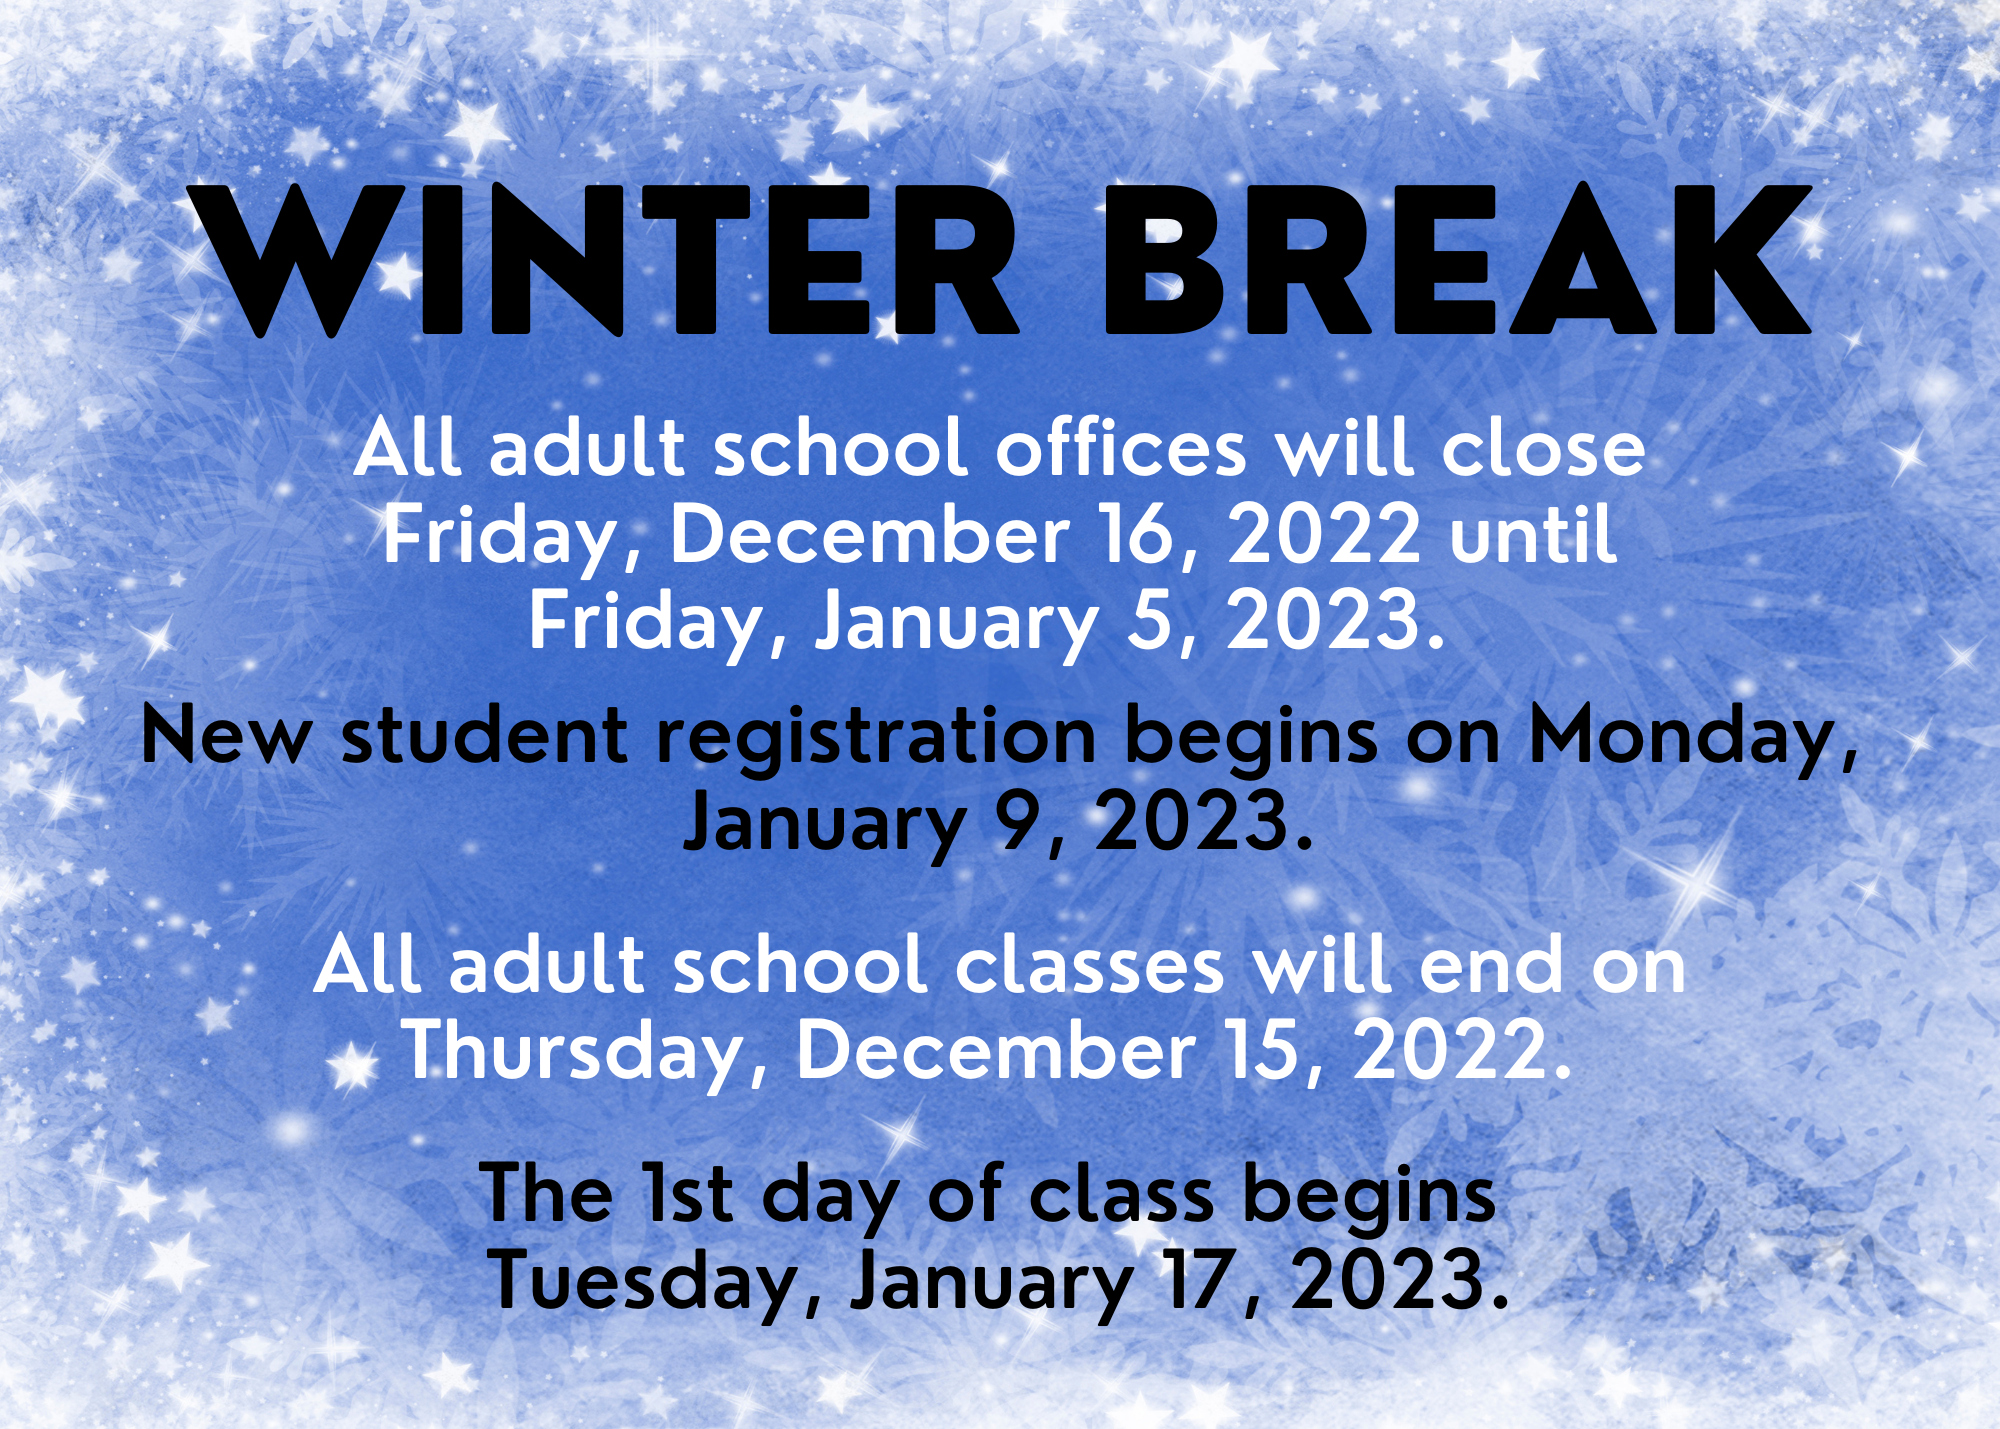 This is our last week of school. All offices and classes will be closed starting Friday, December 6th until Friday, January 5th, 2023. Offices will reopen Monday, January 9, 2023 for new student registration. Classes begin on Tuesday, January 17, 2023.